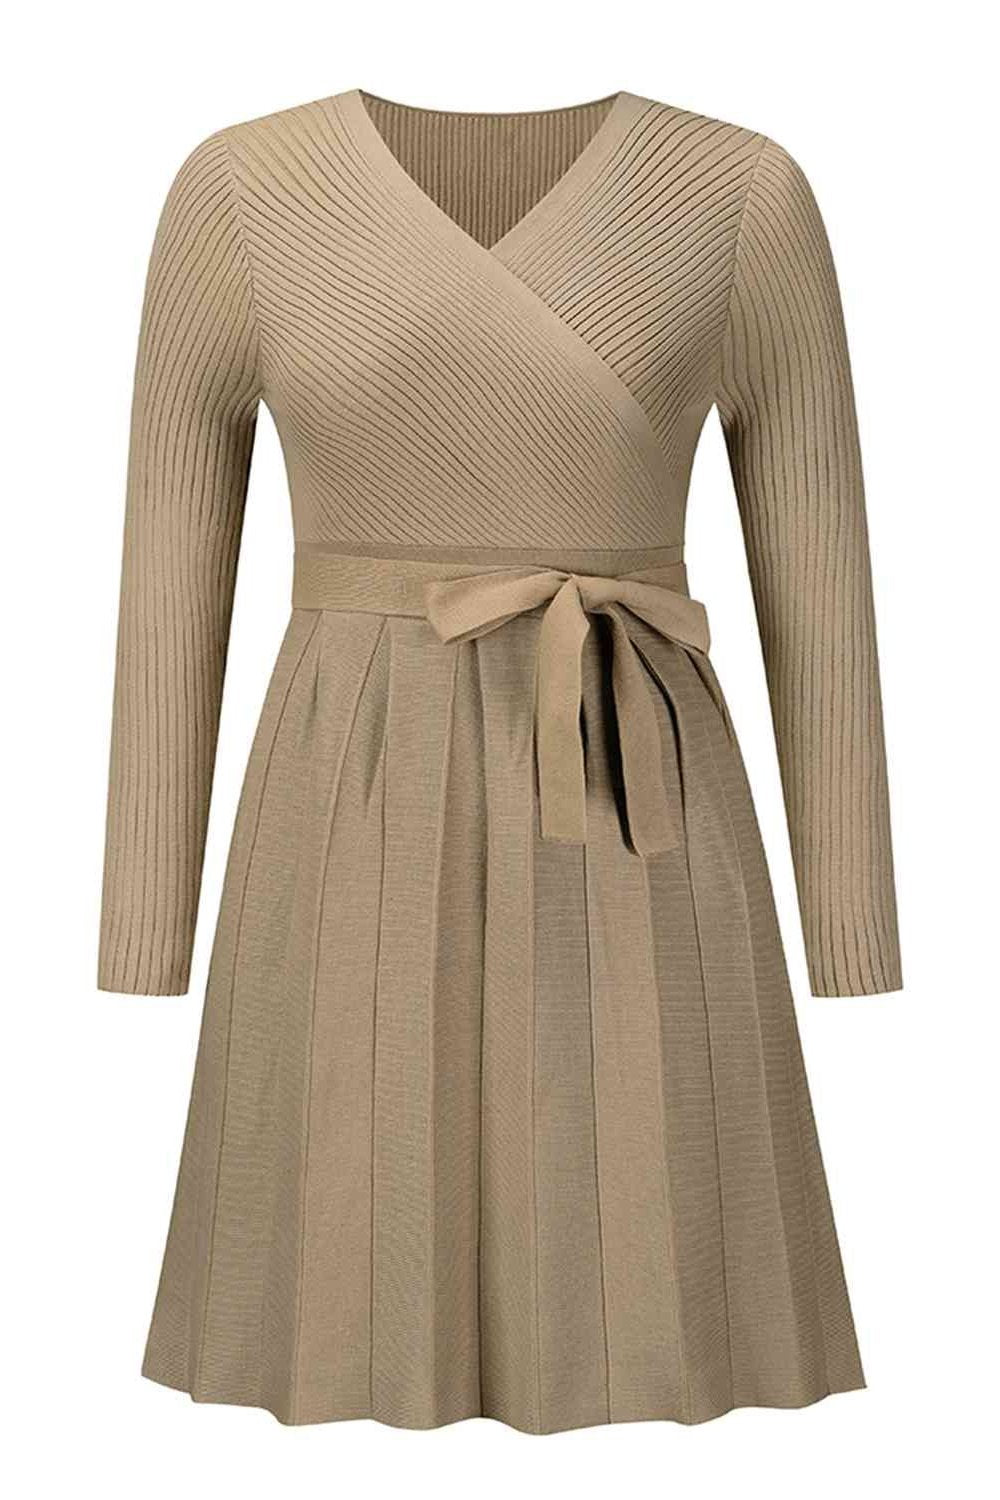 Surplice Neck Tie Front Pleated Sweater Dress - Sweater Dresses - FITGGINS